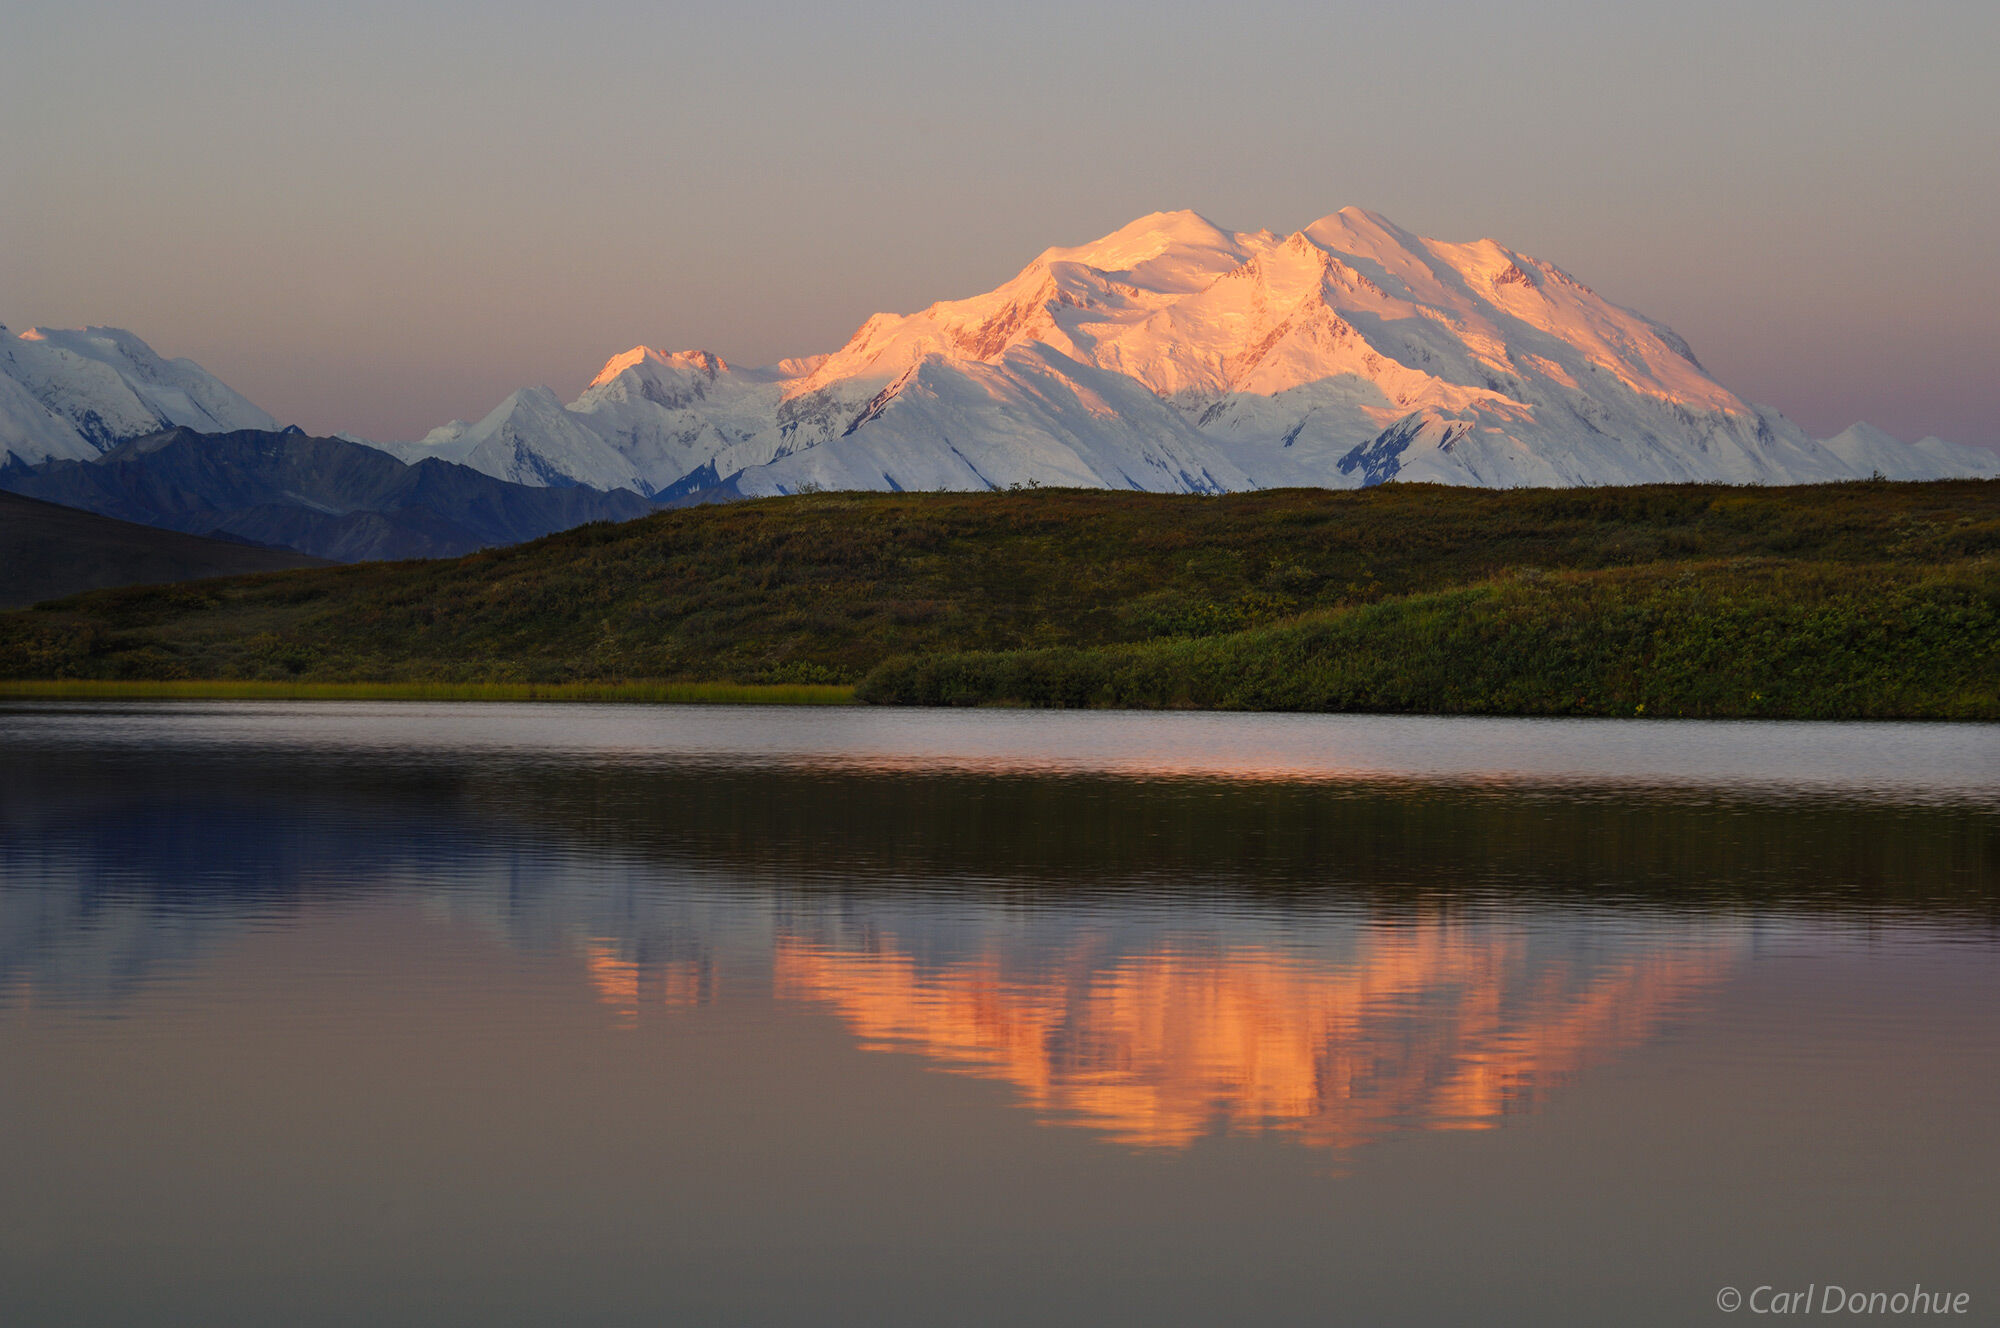 "Denali", officially known as Mt. McKinley, the highest peak in North America, stands above the Alaska Range, a small kettle...